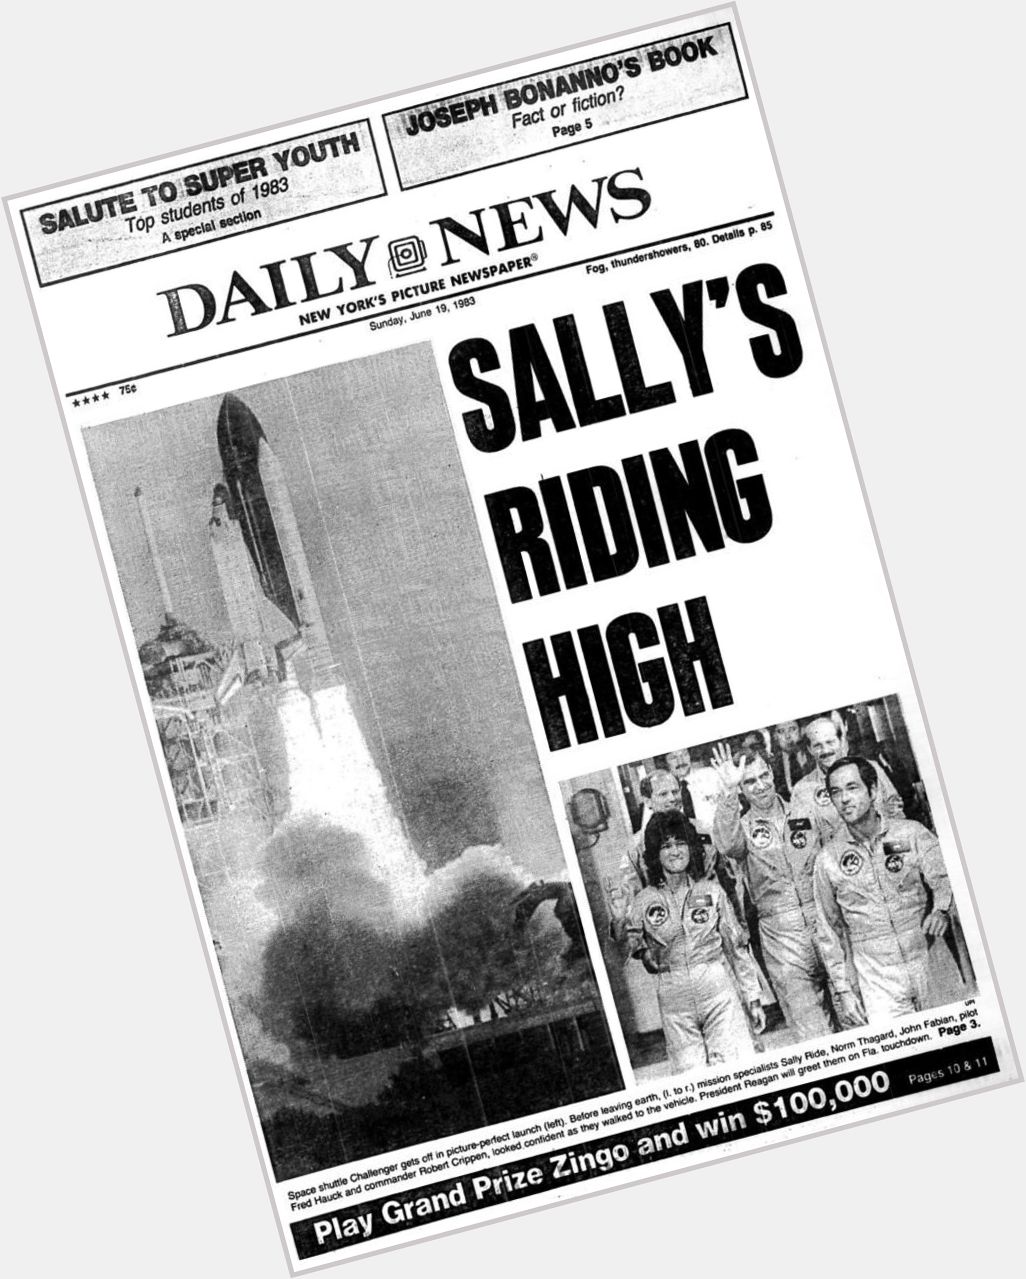 Happy 66th birthday Sally Ride! She becomes the first American woman in space in 1983  